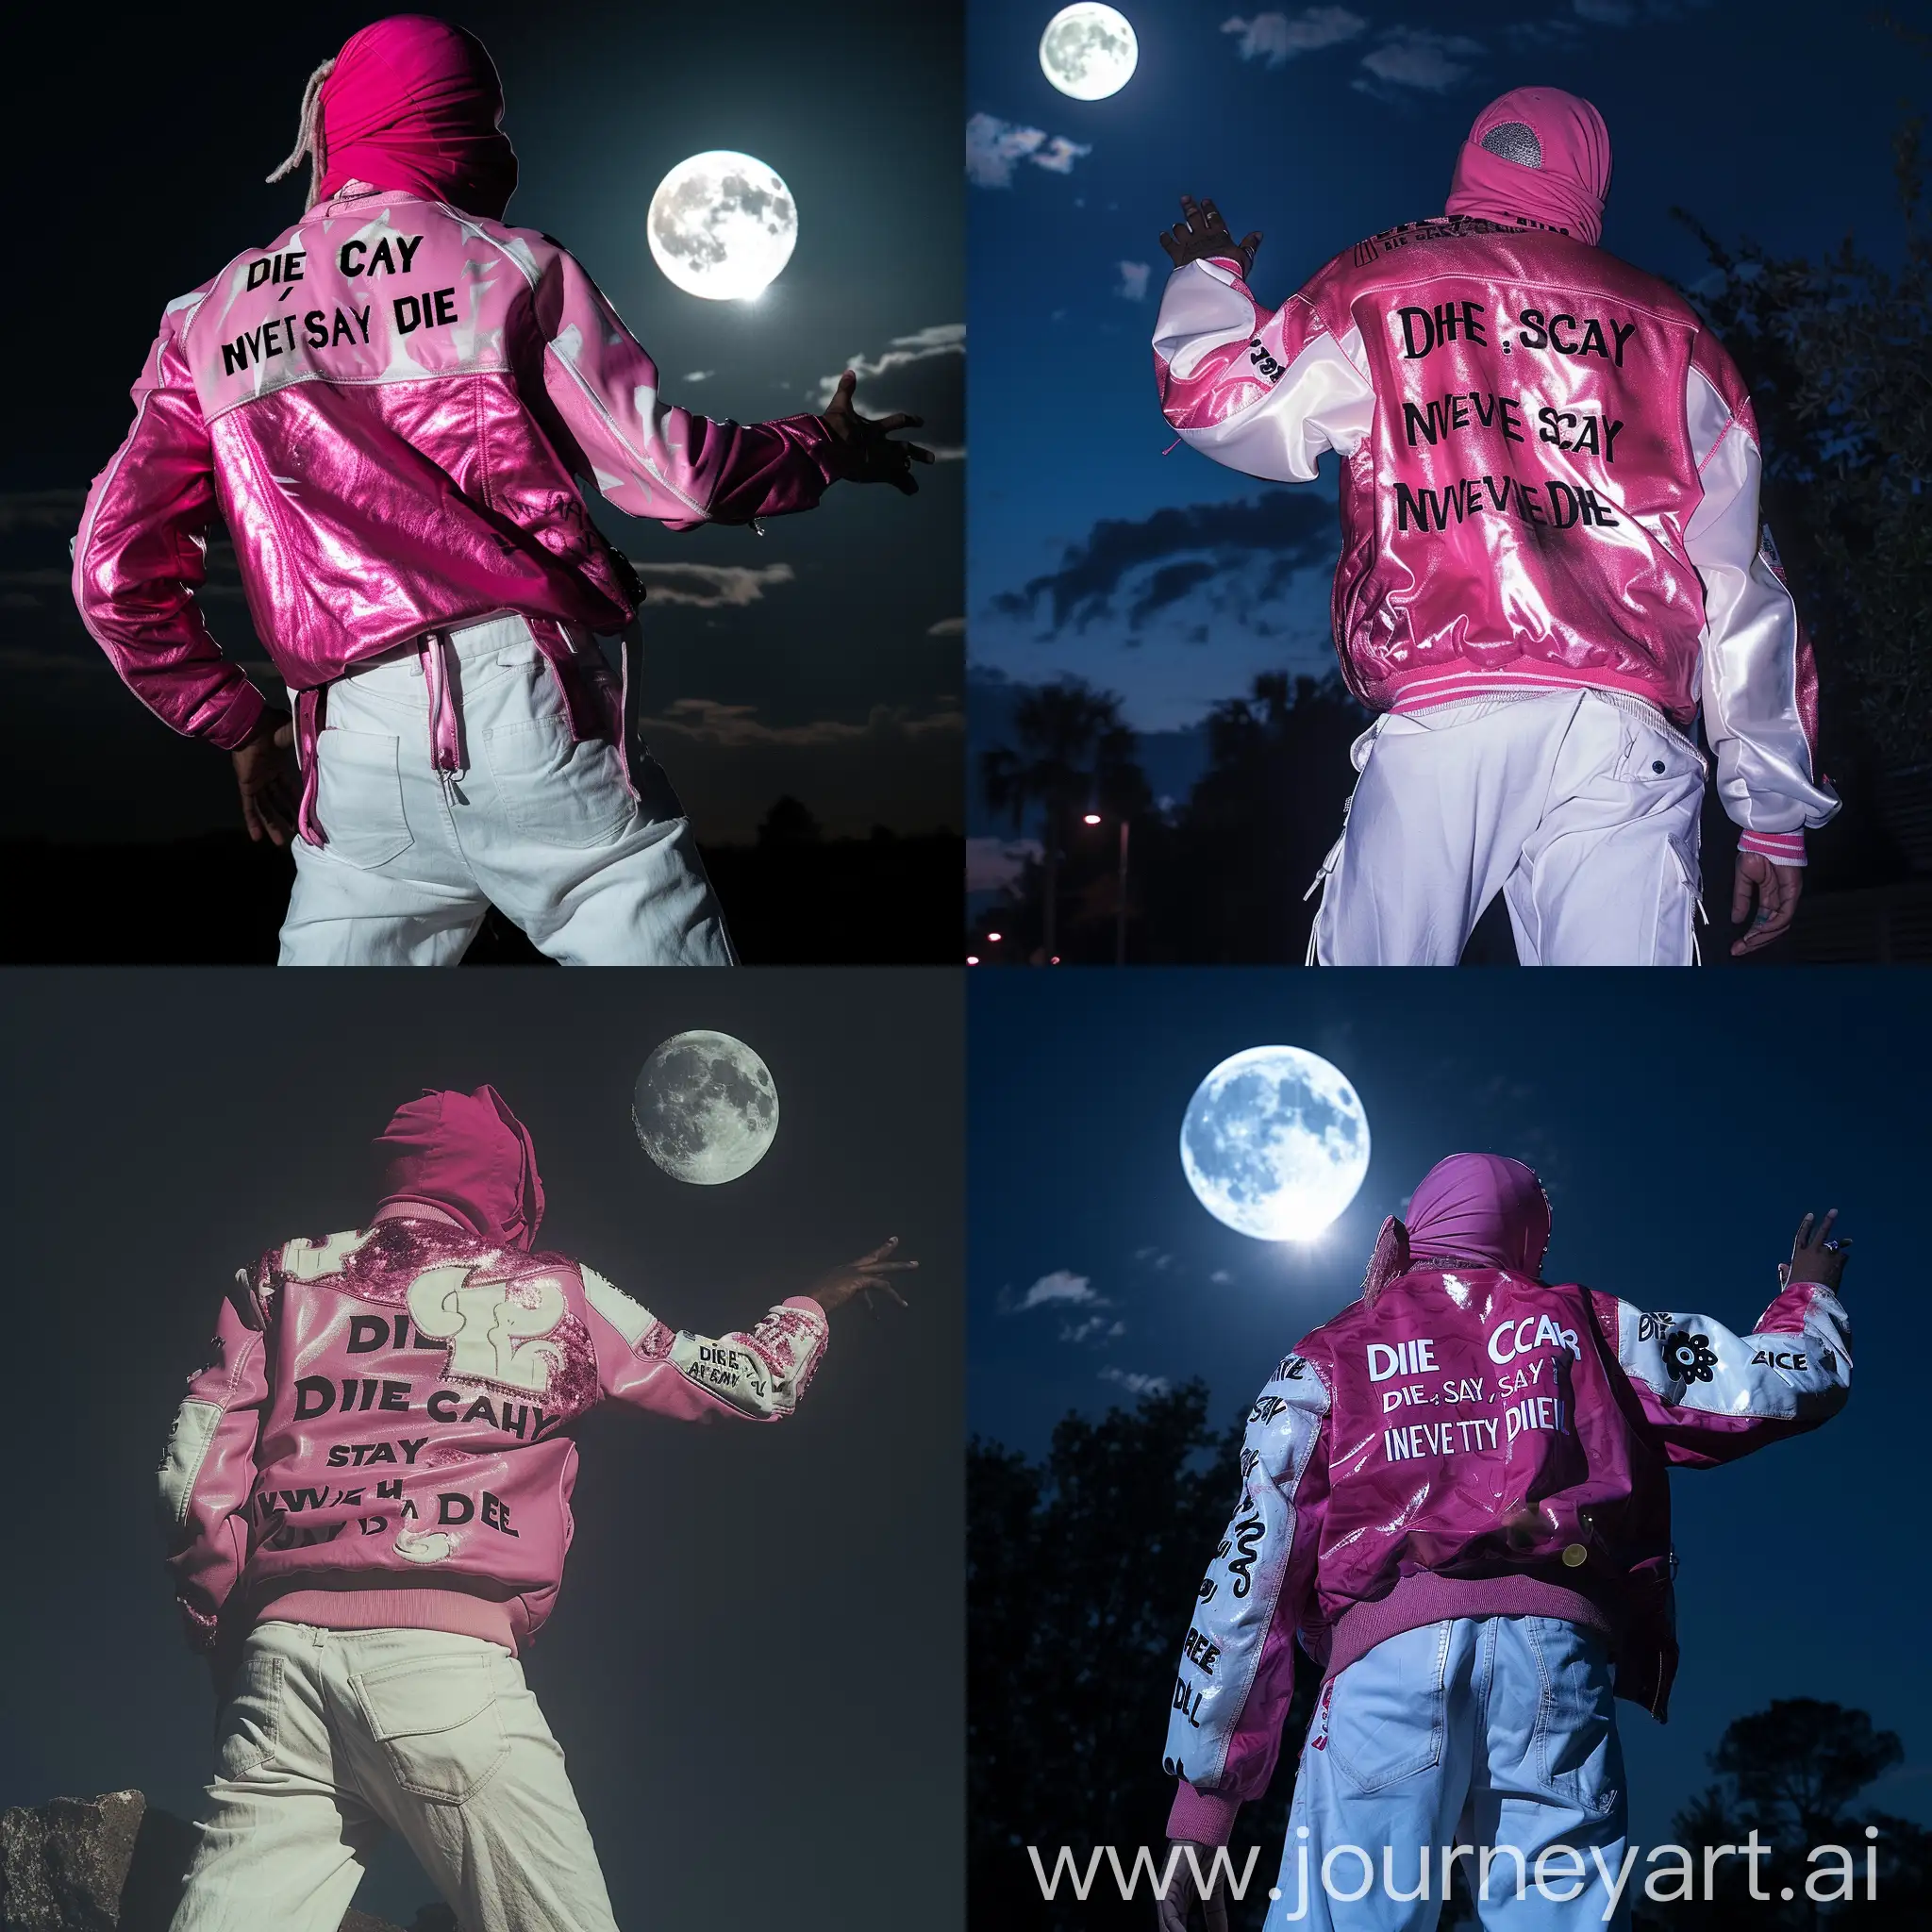 Tall-Figure-in-Pink-Balaclava-Reaching-for-Moon-in-Leather-Jacket-at-Night